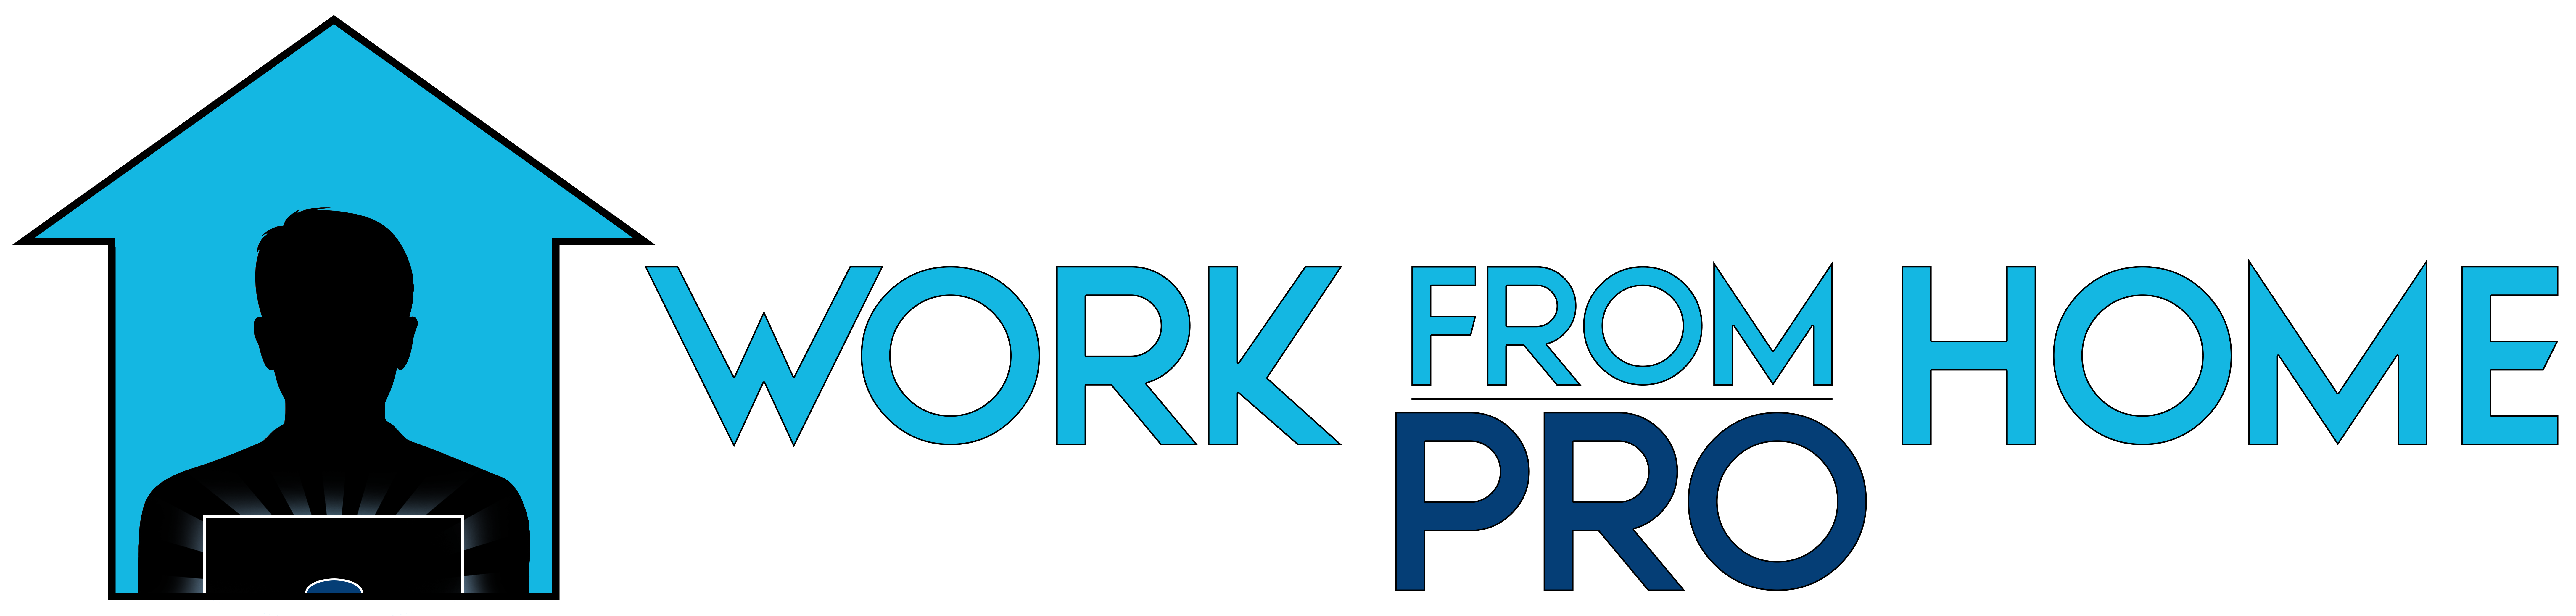 work from home pro logo